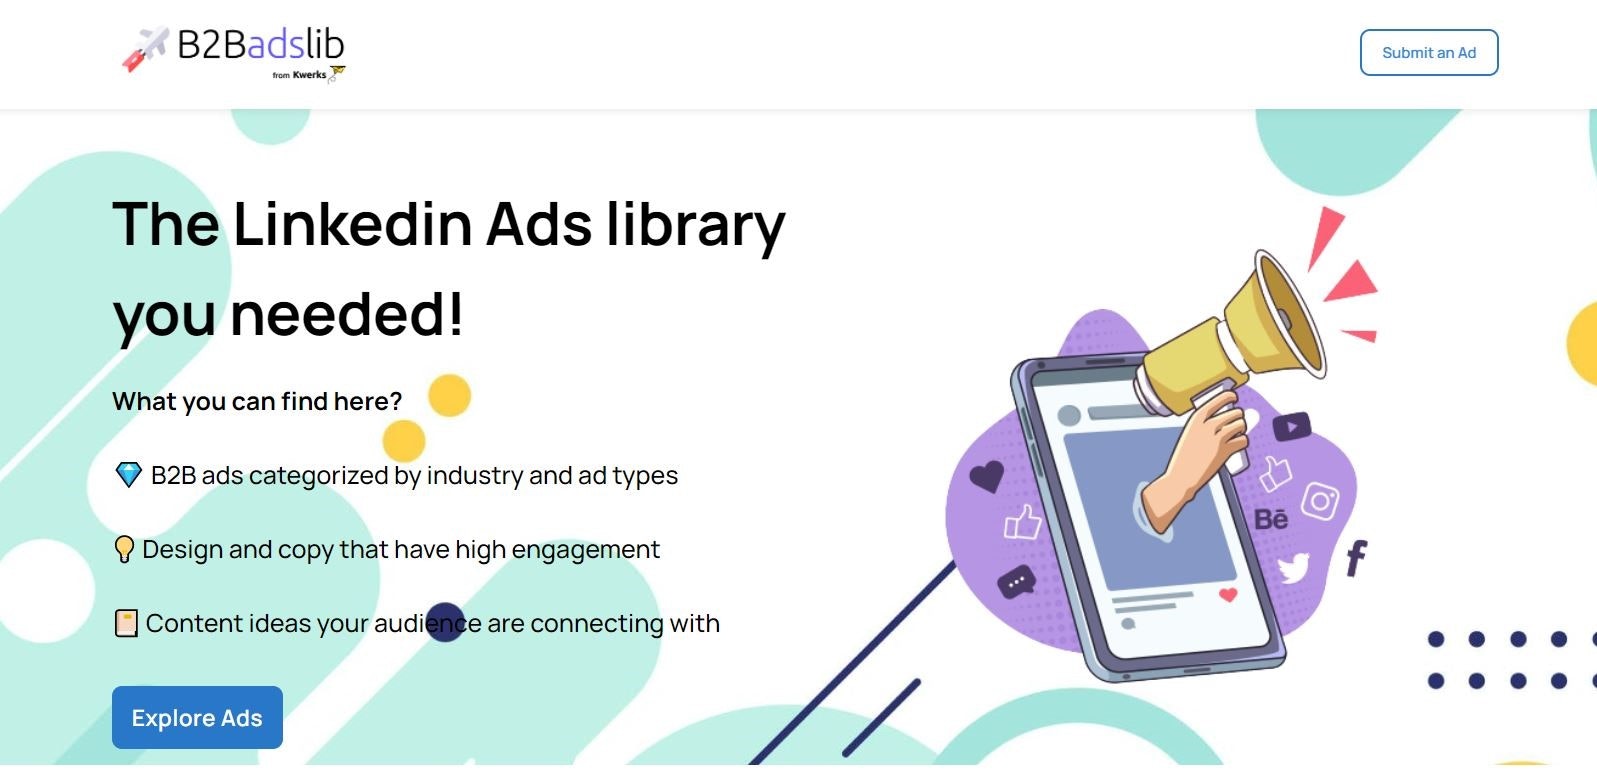 Ads library